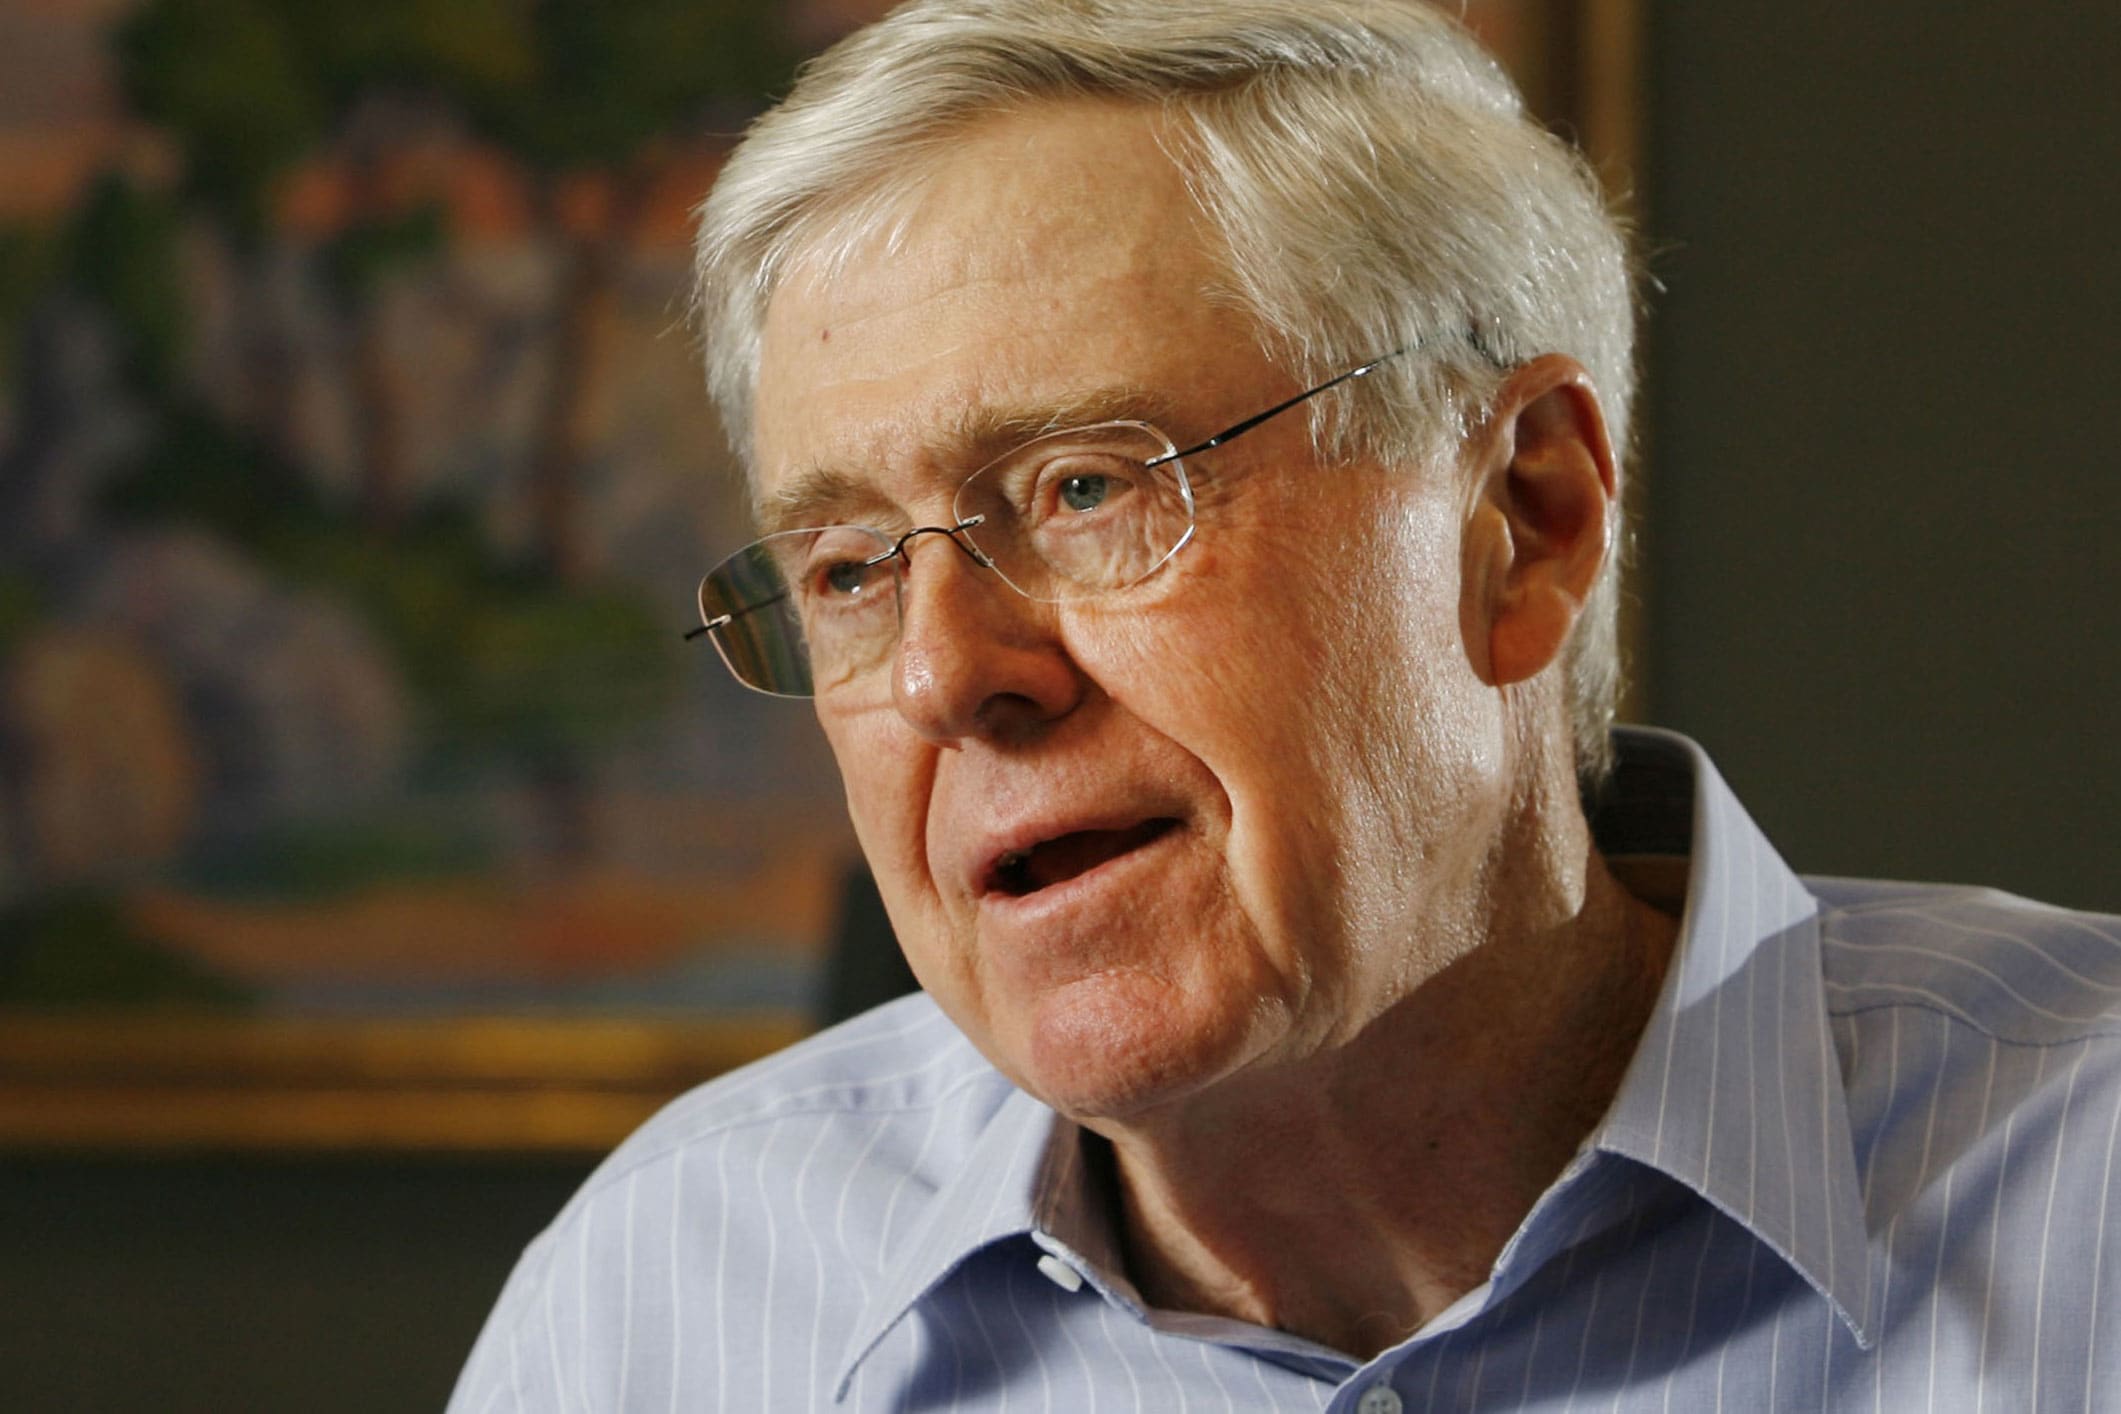 Influential Koch network rocked by an alleged affair scandal, donor departures and a discrimination lawsuit